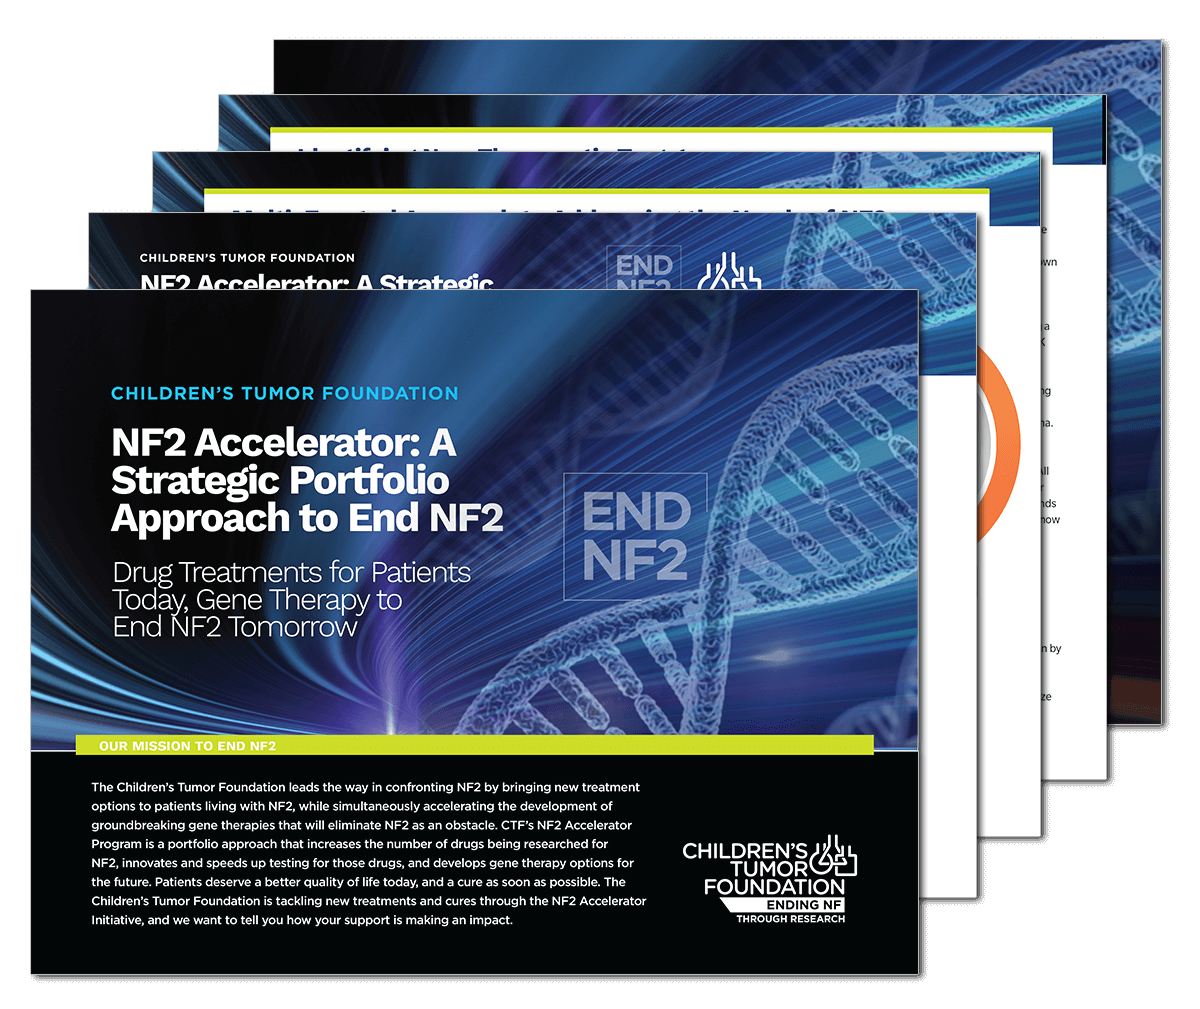 Ncf accelerator and strategic portfolio approach to end nps.